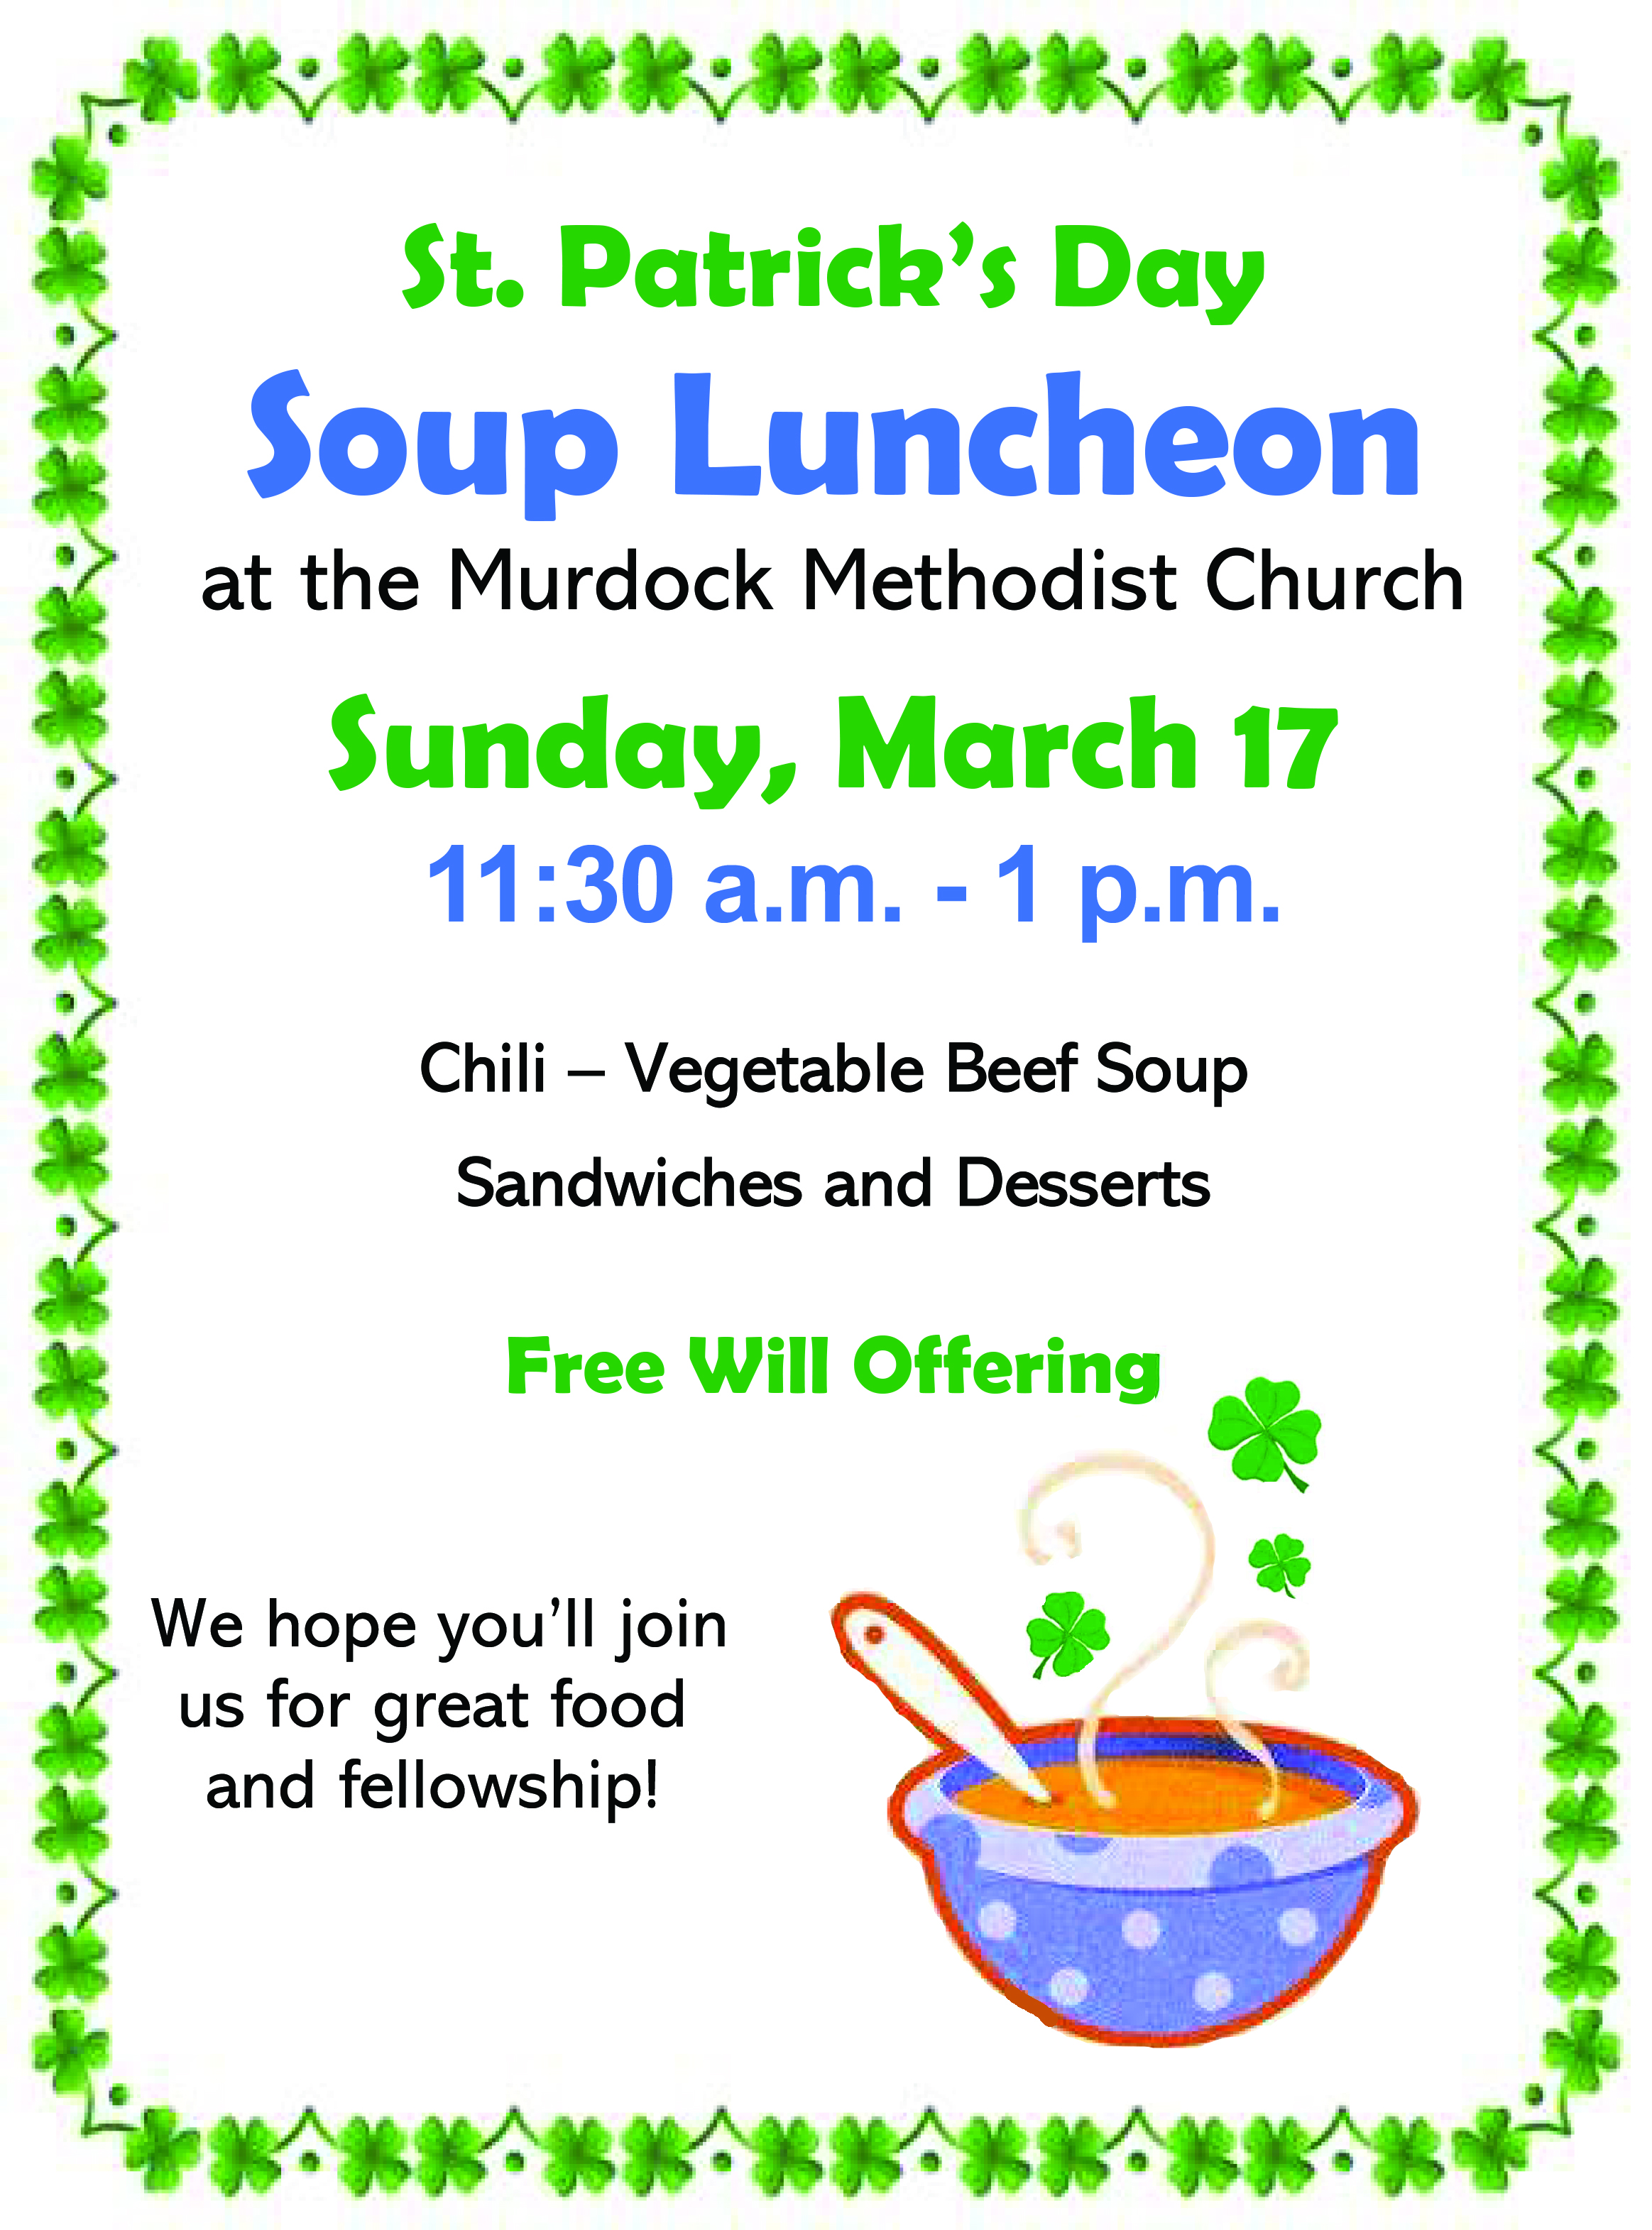 Soup Luncheon Flyer